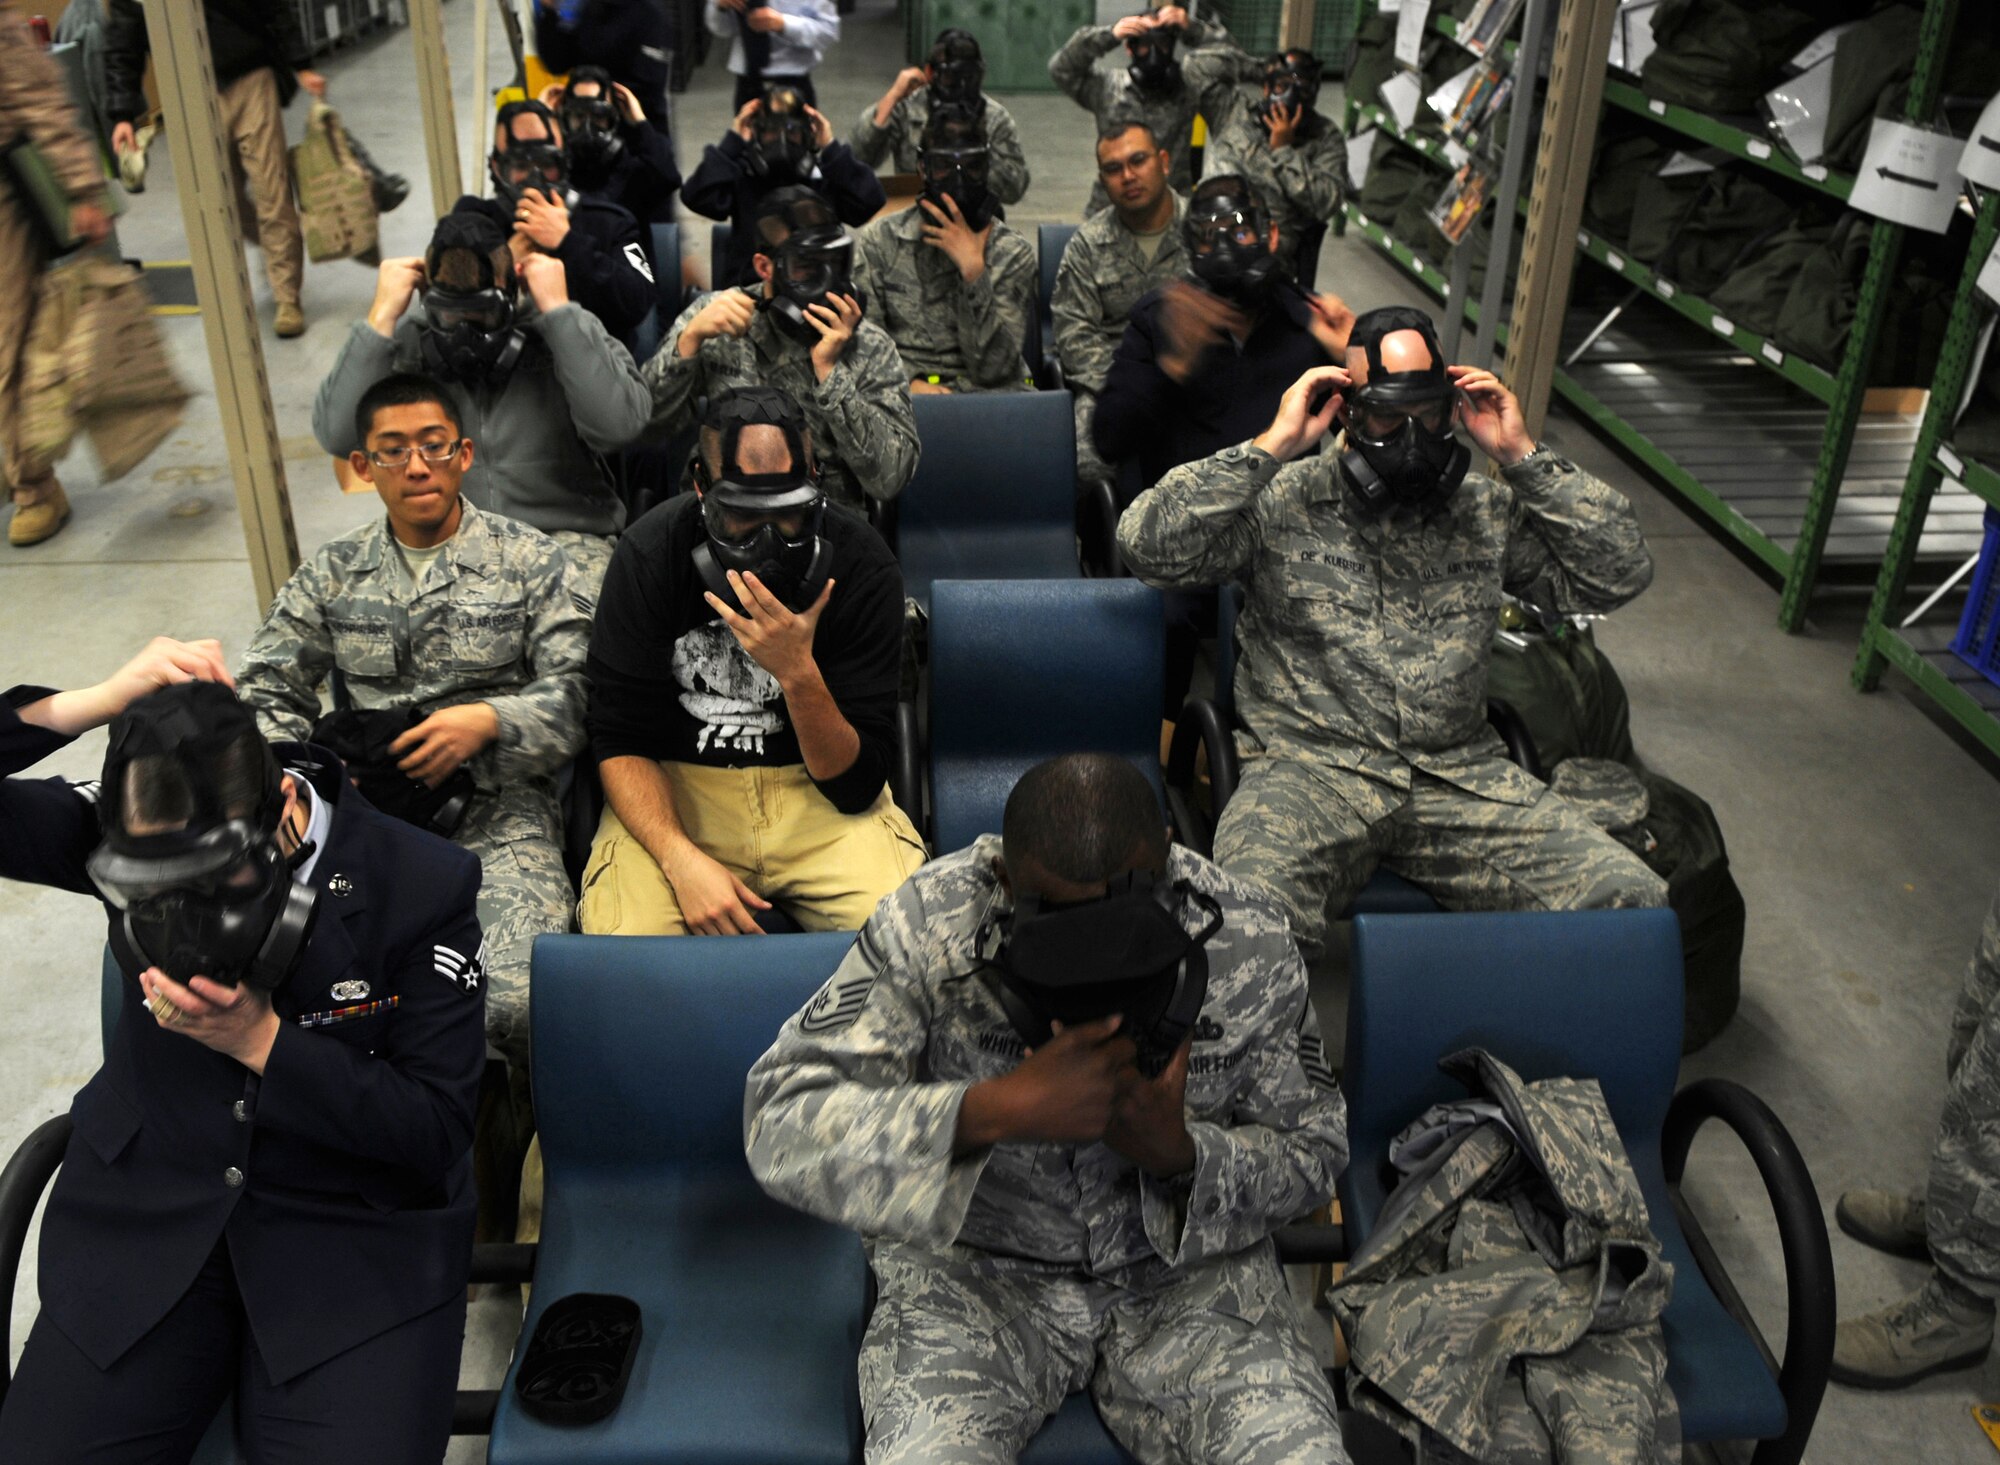 Ramstein personnel attend a class on the proper usage of the new M50 protective mask, November 9, 2009, Ramstein Air Base, Germany.  The M50 protective mask will be replacing the MCU-2P protective mask.  (U.S. Air Force photo by Staff Sgt. Charity Barrett)